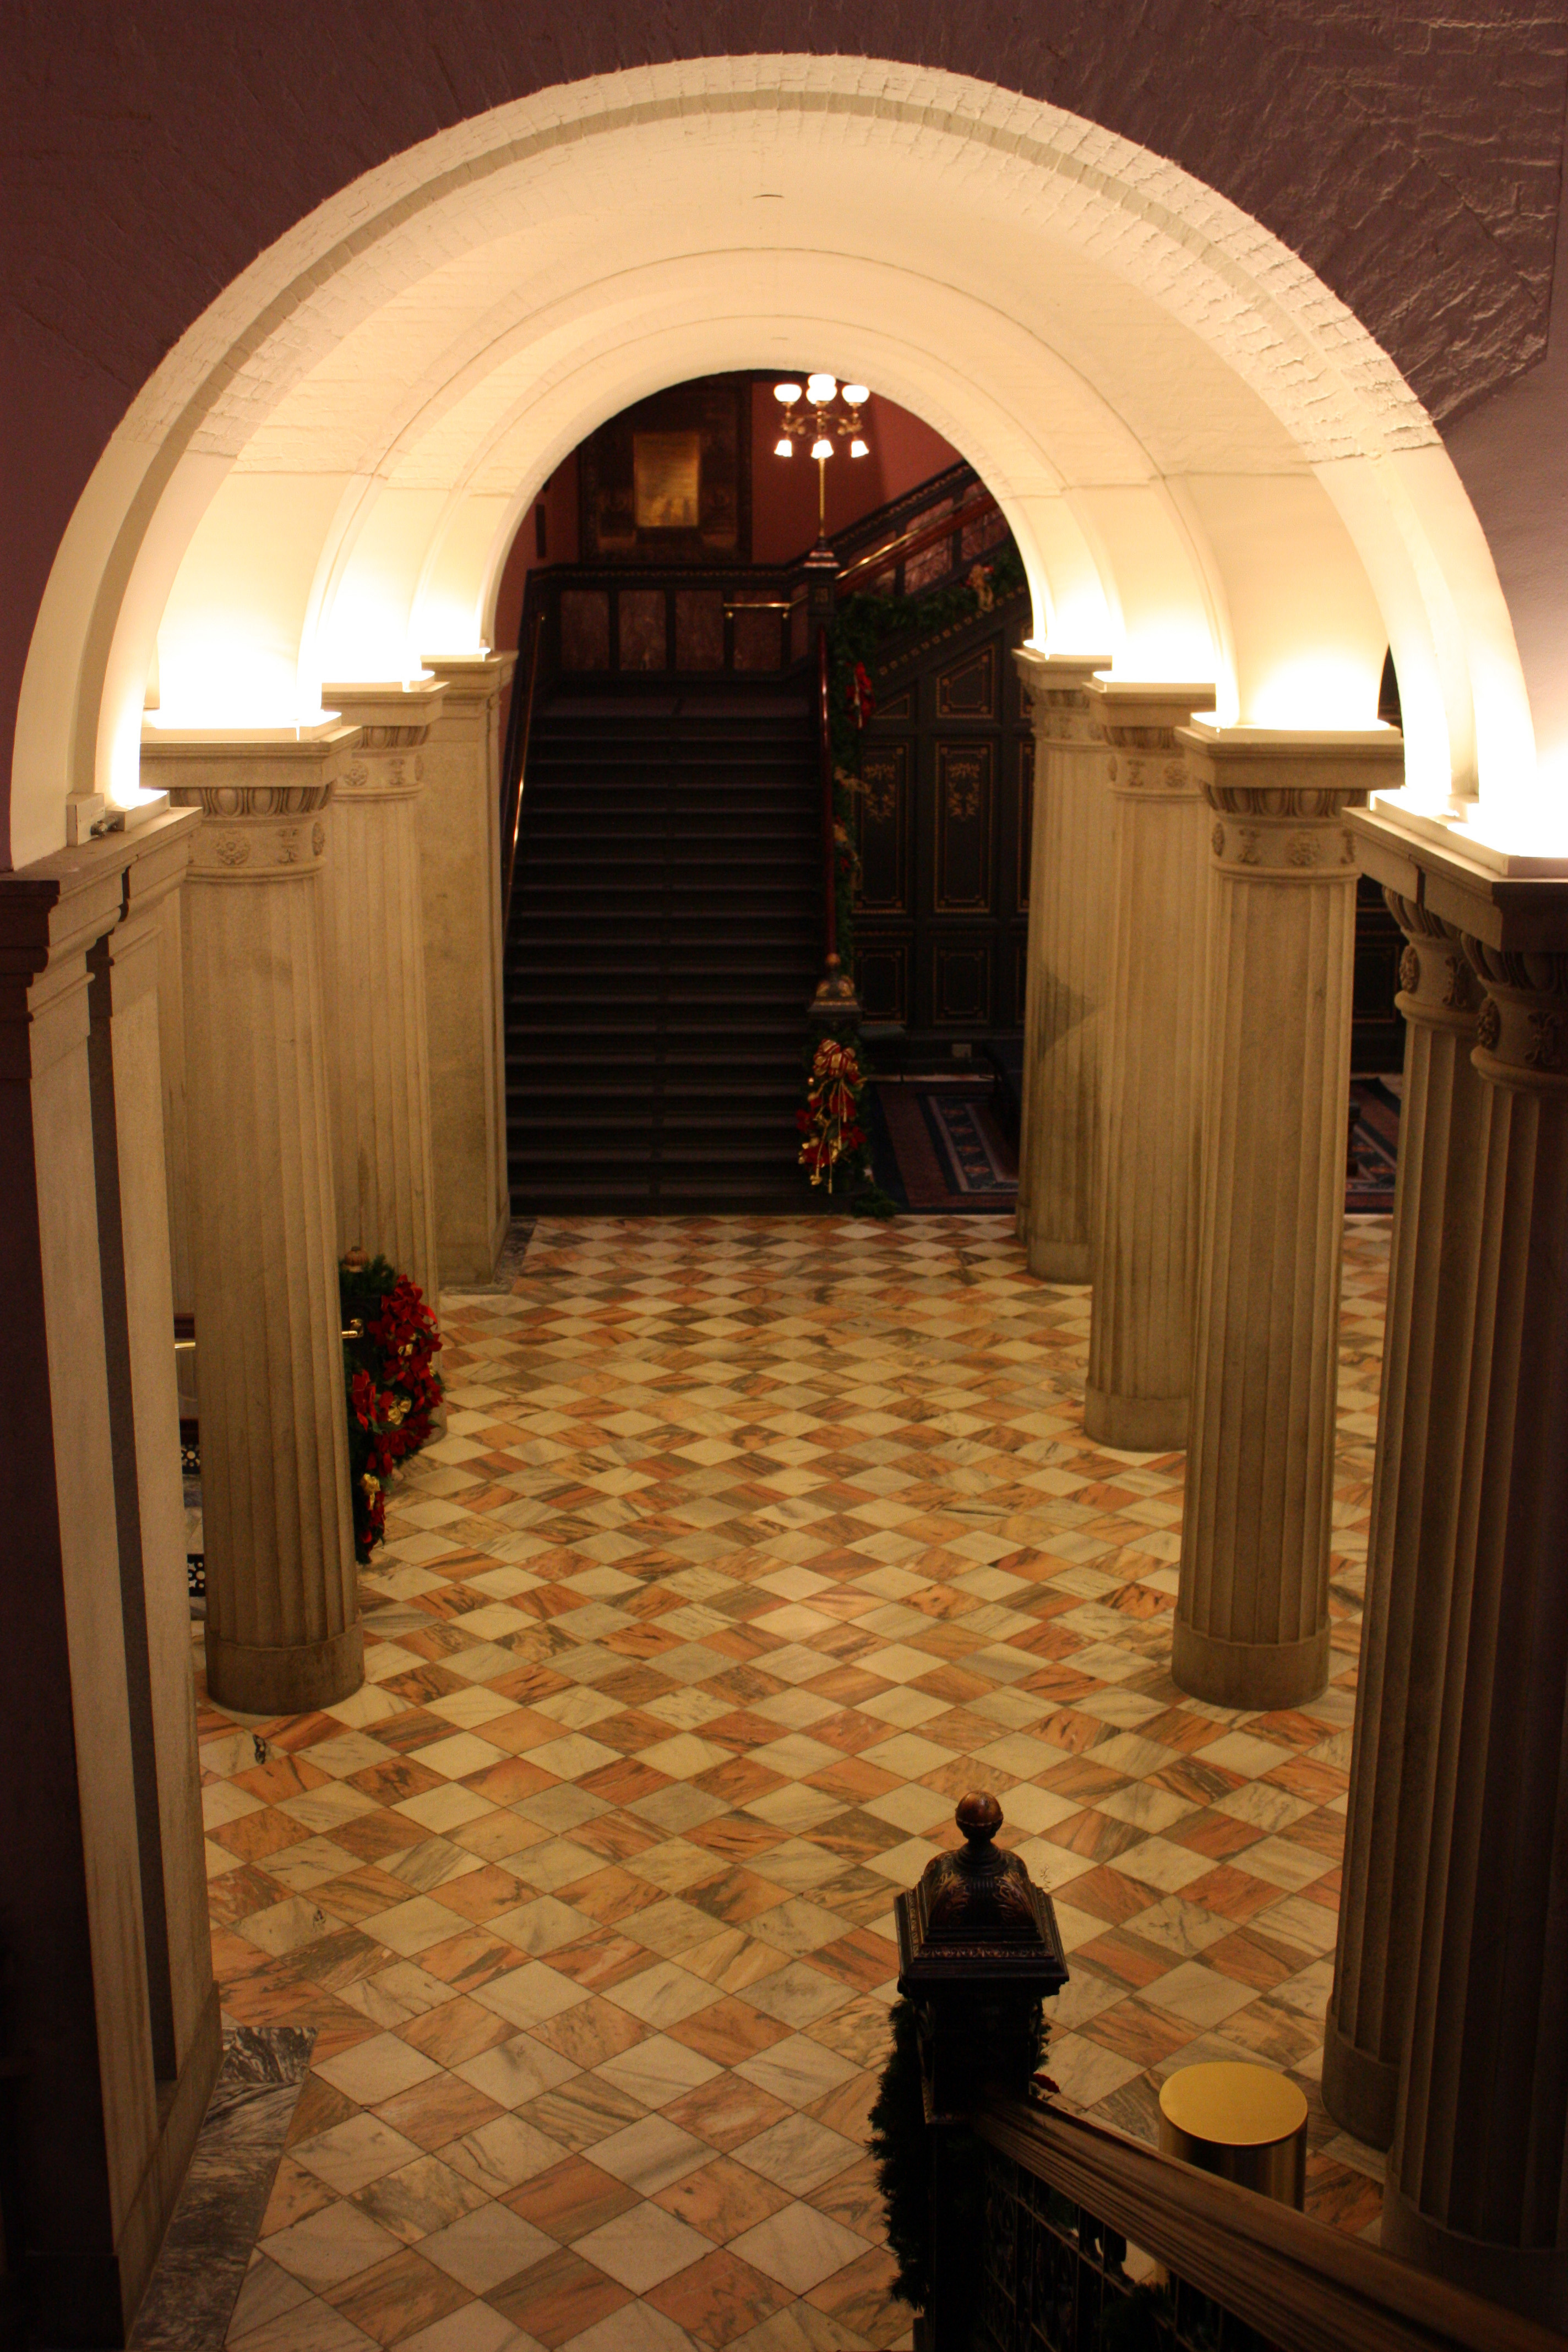 First Floor of the State House